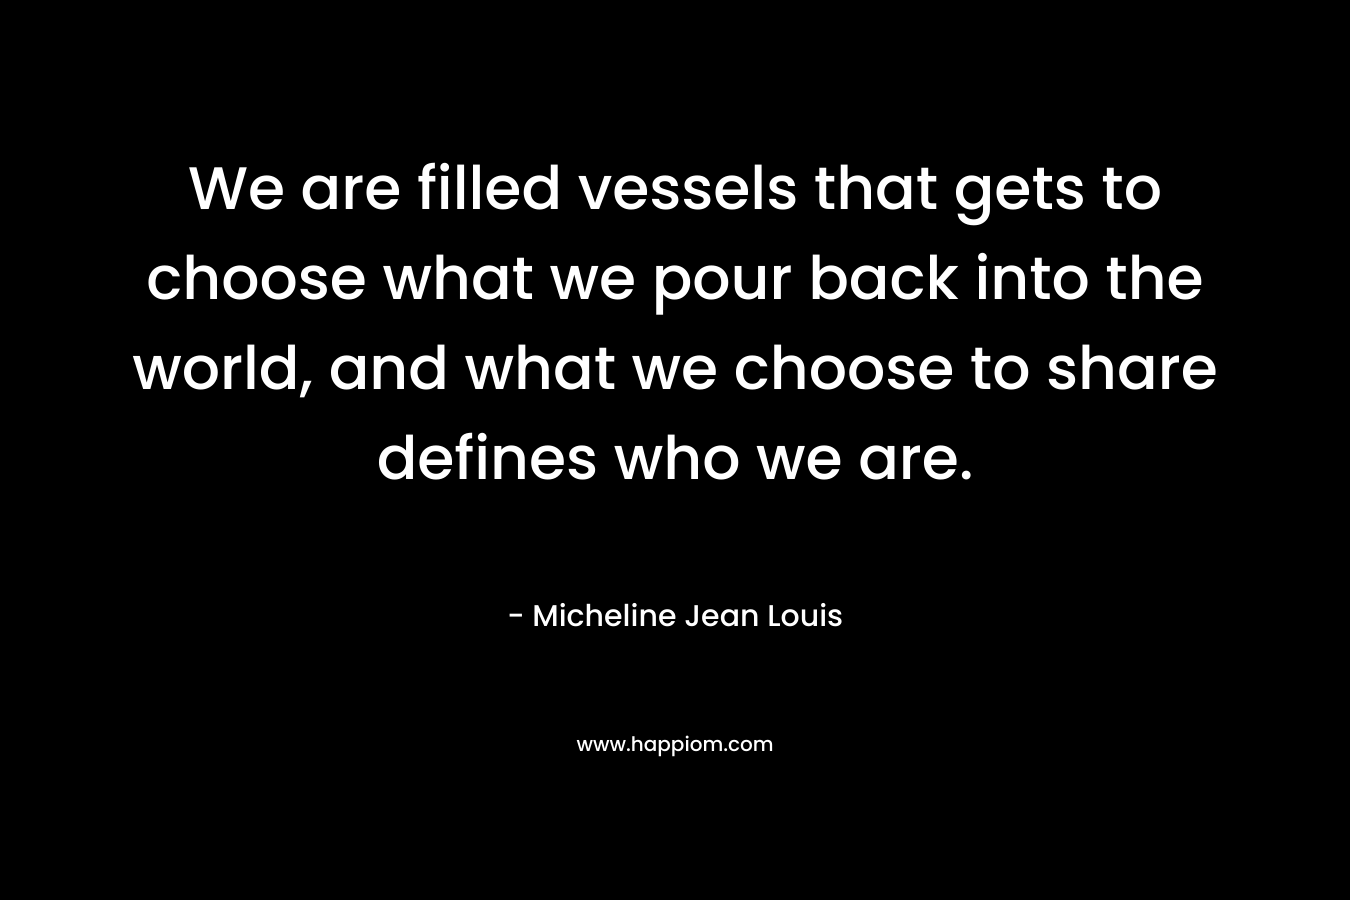 We are filled vessels that gets to choose what we pour back into the world, and what we choose to share defines who we are. – Micheline Jean Louis